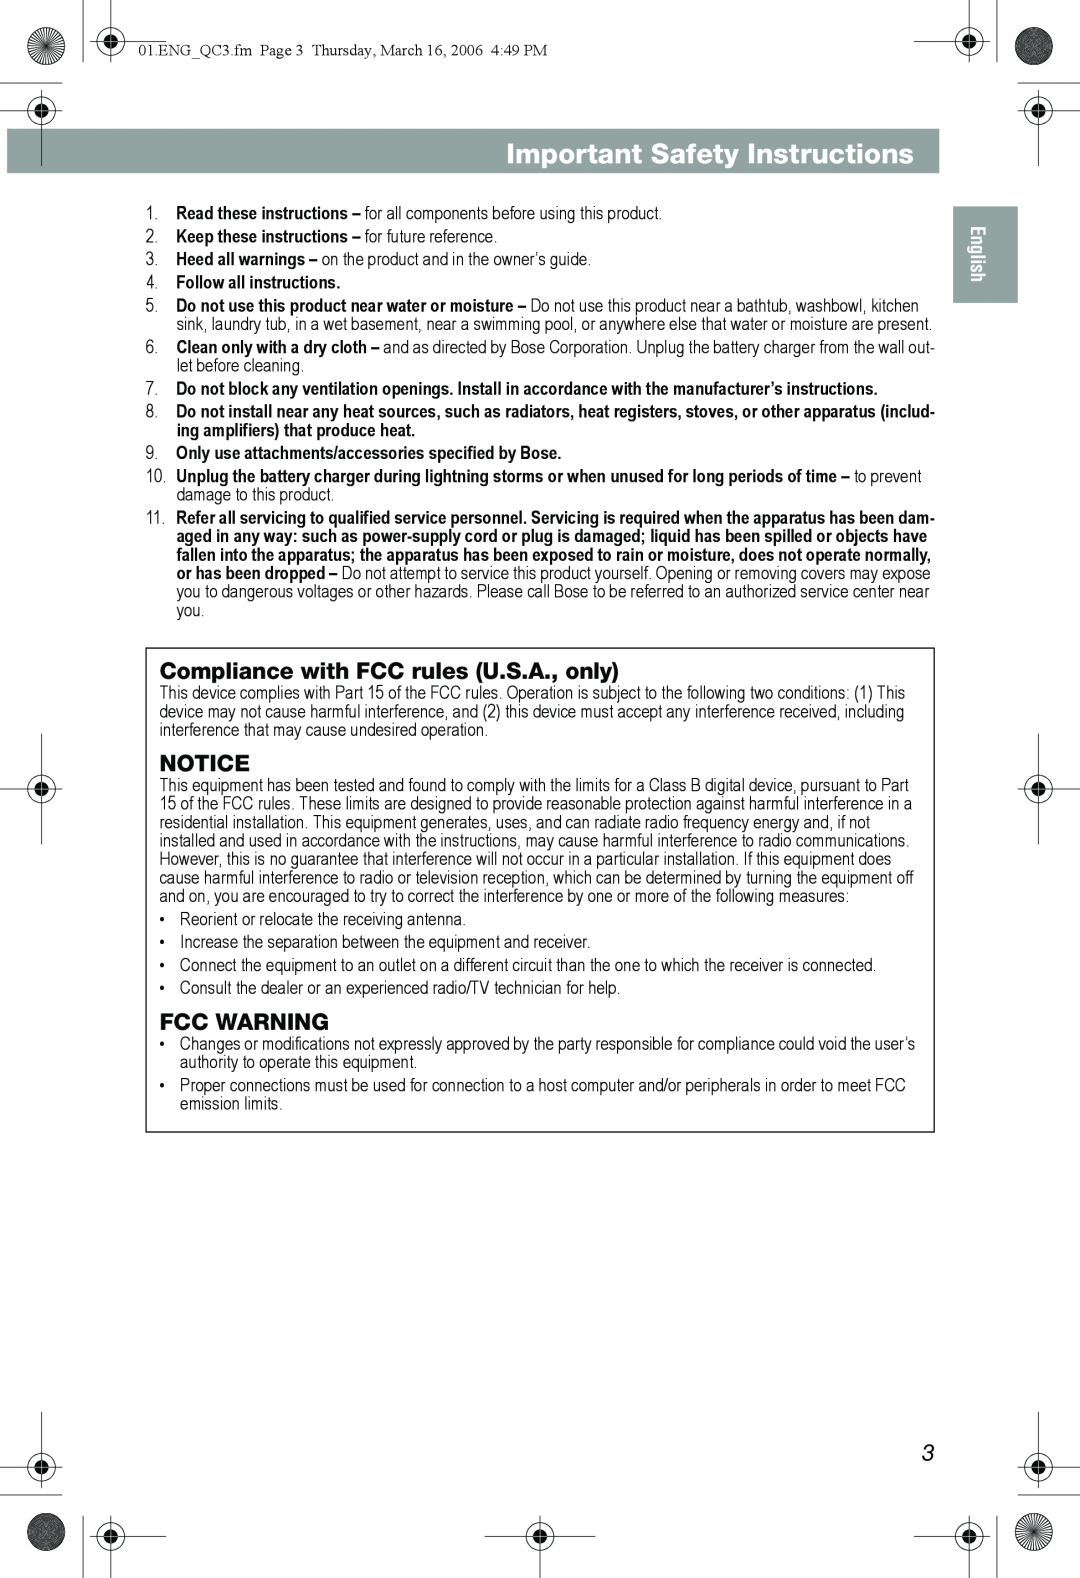 Bose QuietComfort 3 Important Safety Instructions, Compliance with FCC rules U.S.A., only, Fcc Warning, Français, English 